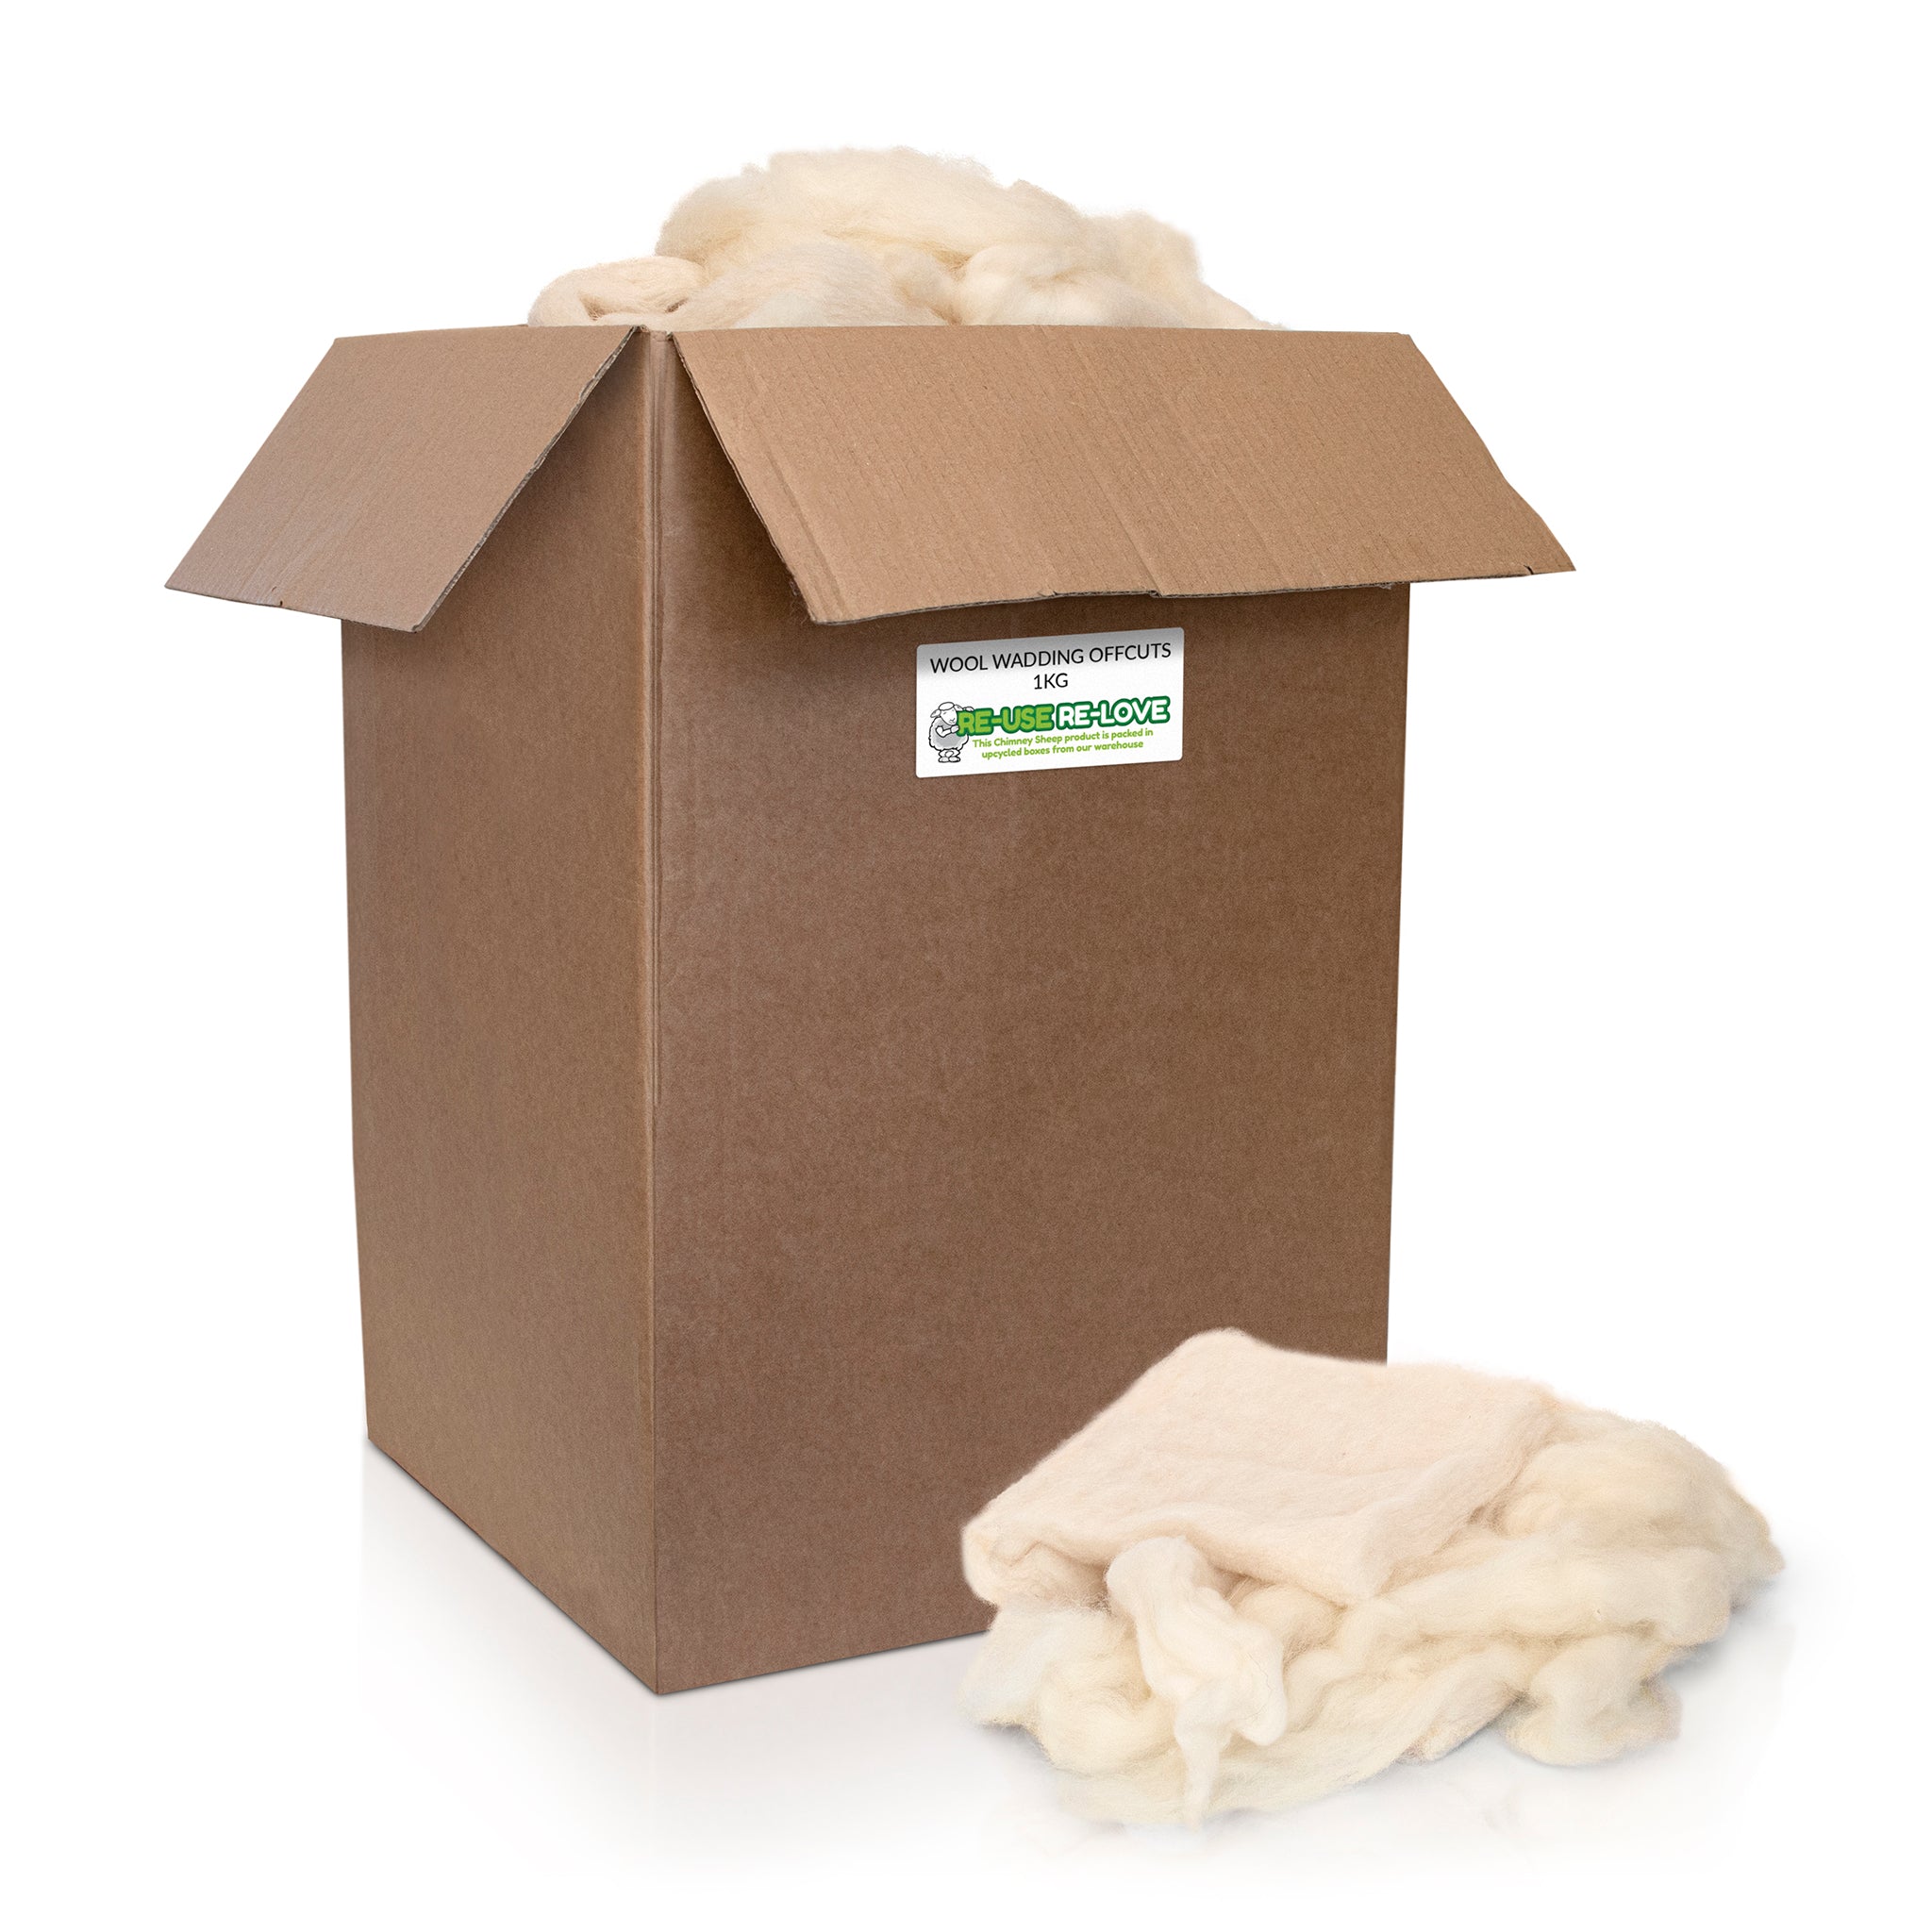 1kg of wool wadding offcuts in a box